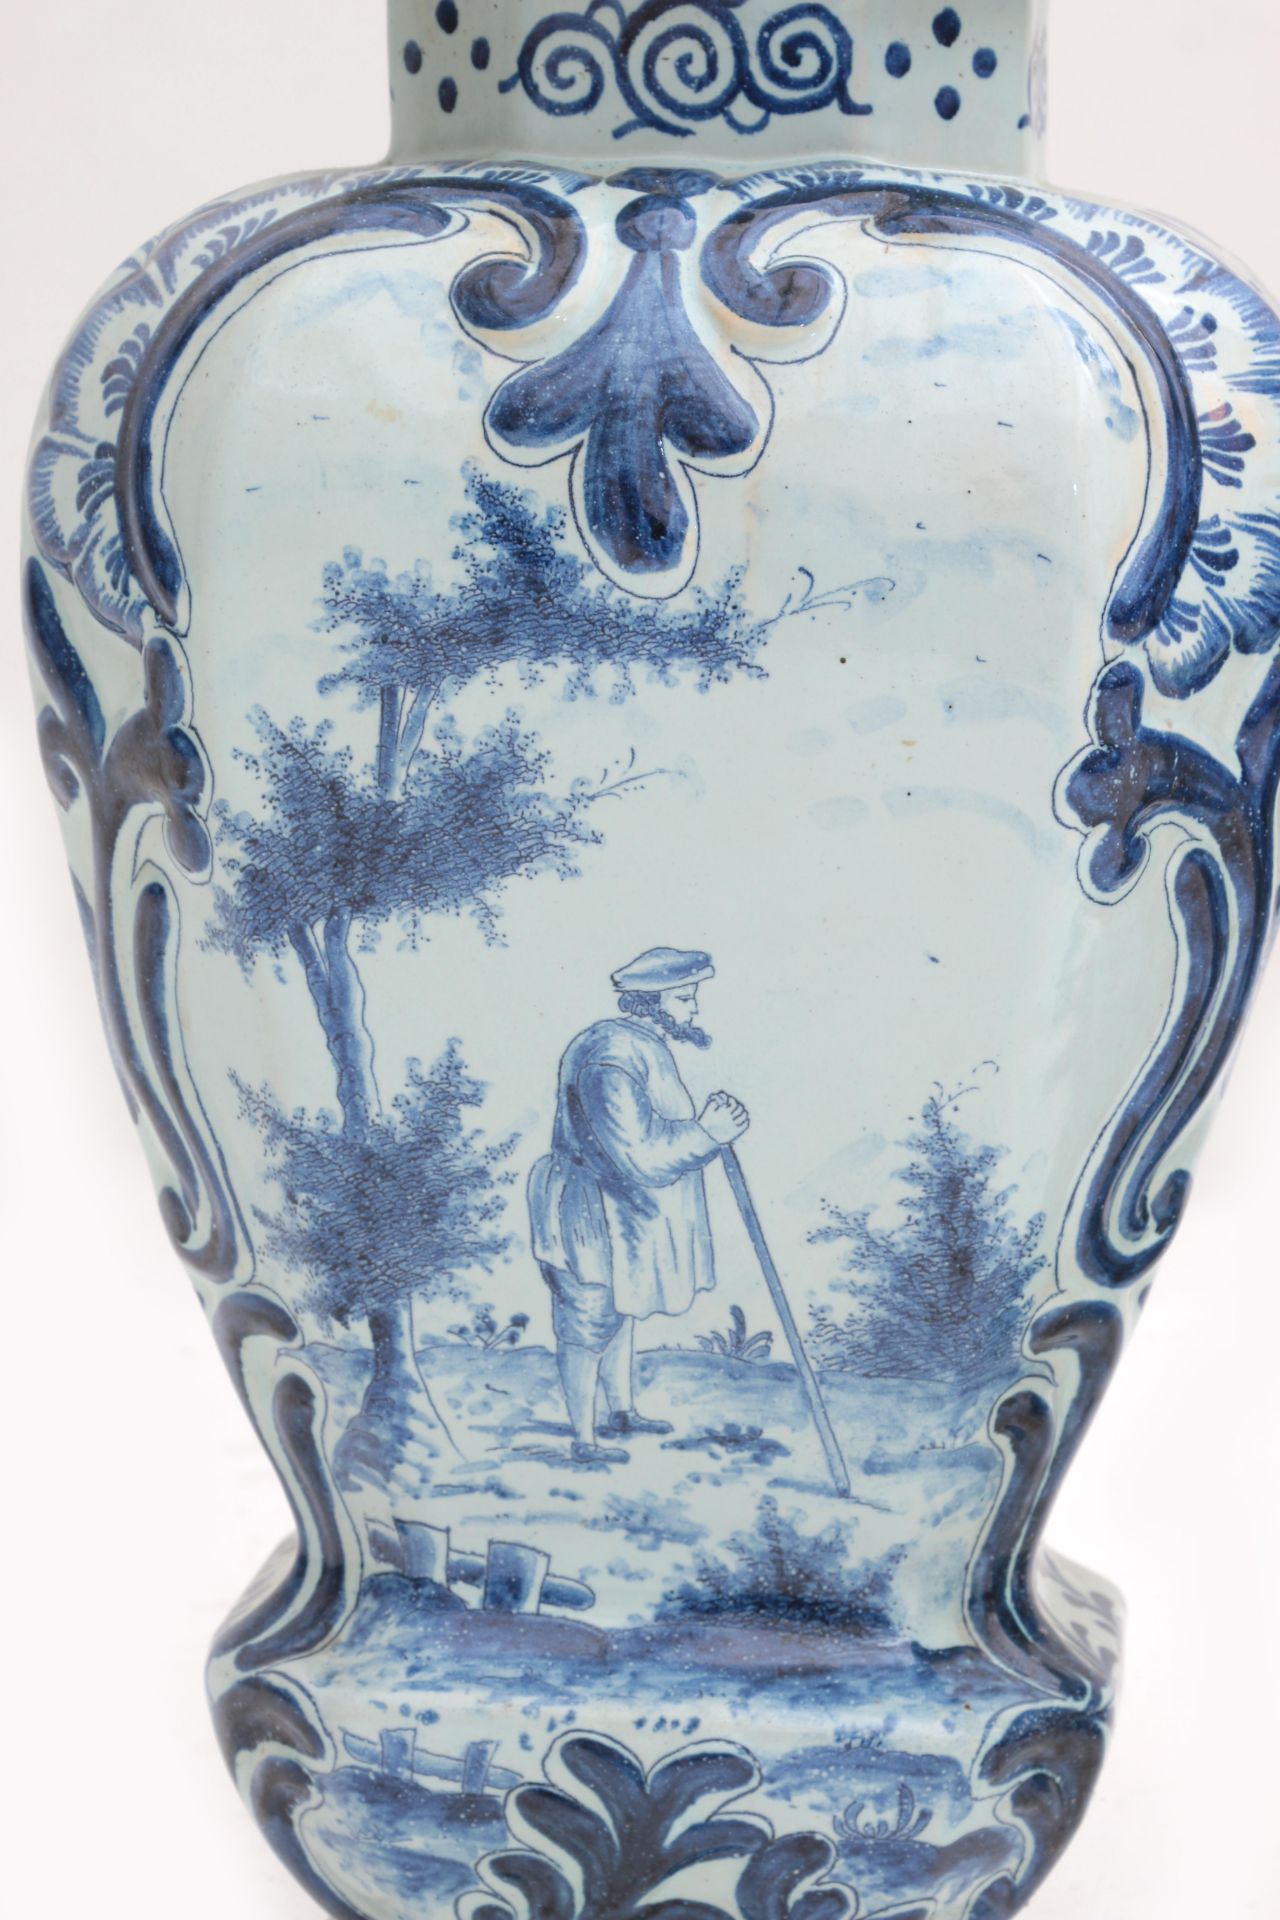 A pair of large Delft blue and white covered vases, decorated with foliate motifs, a man with a - Bild 5 aus 6